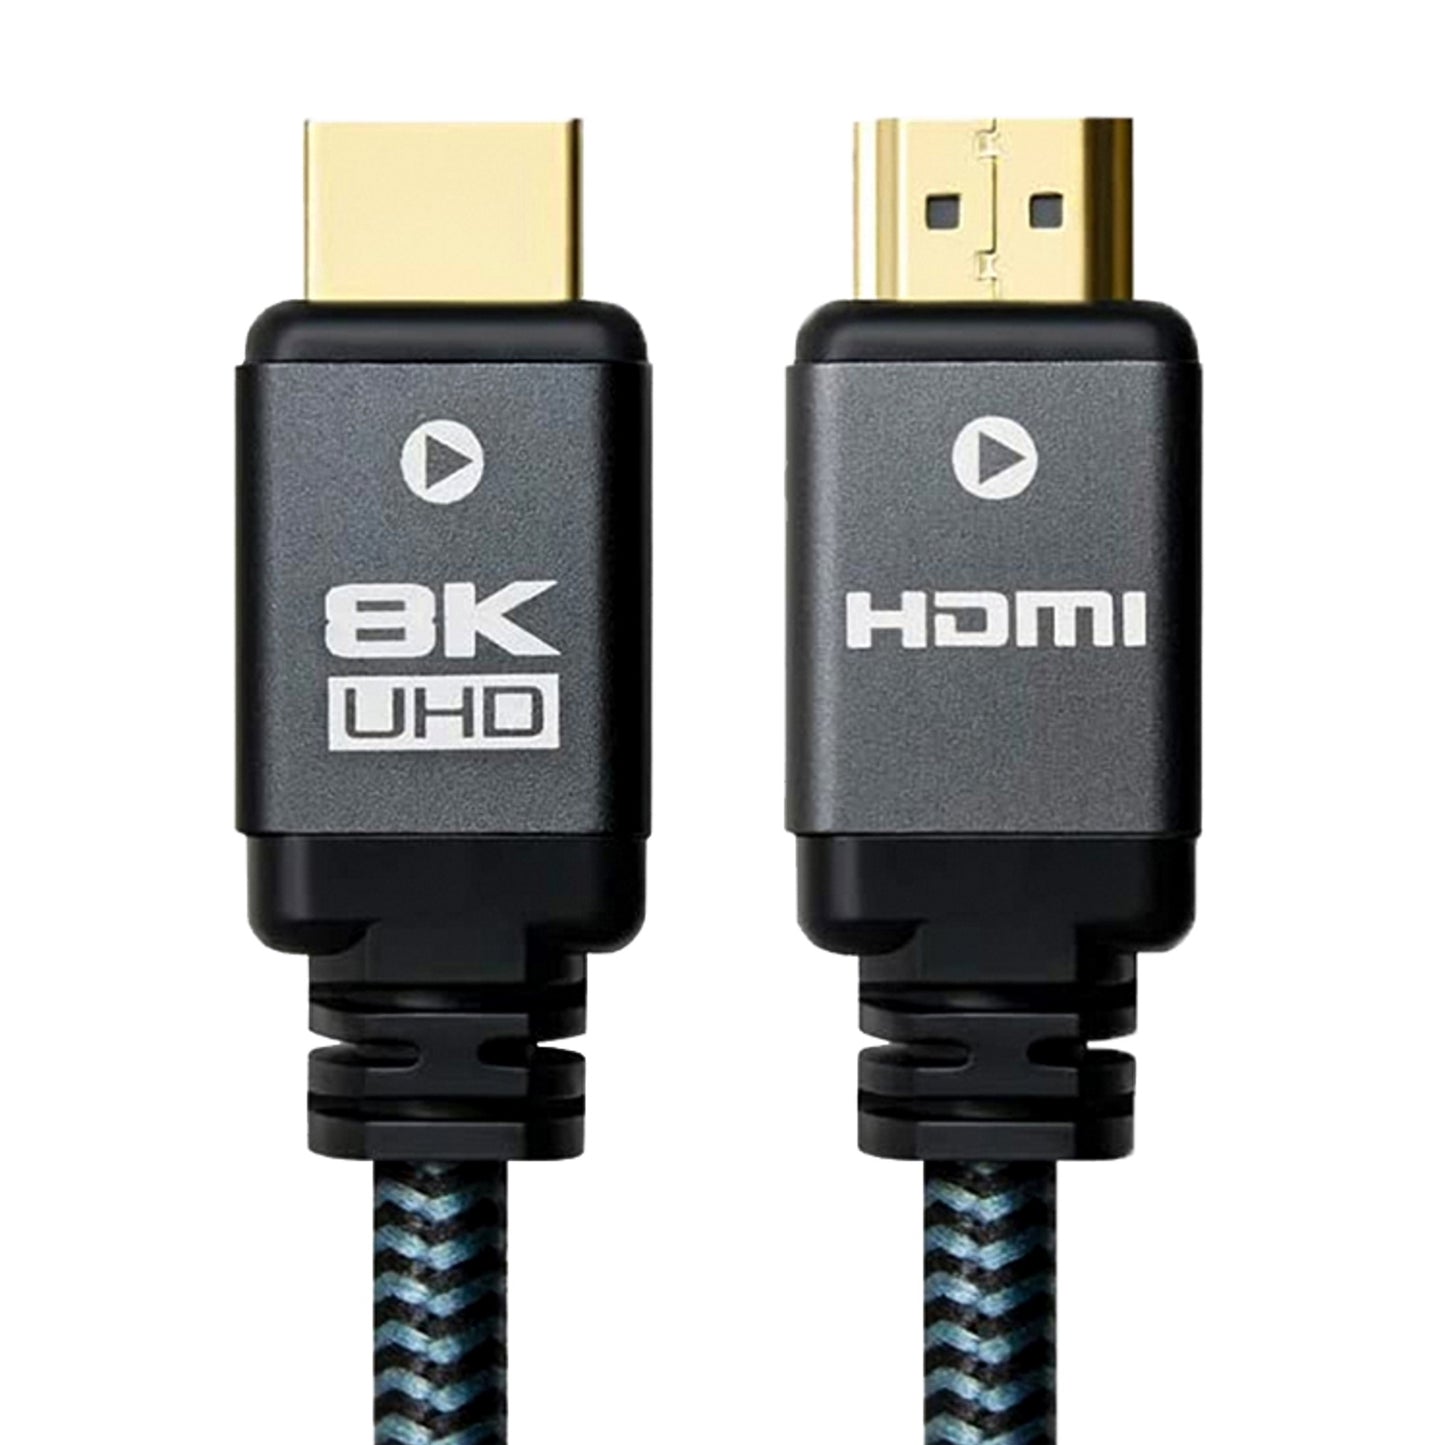 Prevo HDMI-2.1-3M HDMI Cable, HDMI 2.1 (M) to HDMI 2.1 (M), Black & Grey, Supports Displays up to 8K@60Hz, 99.9% Oxygen-Free Copper with Gold-Plated Connectors, Superior Design & Performance